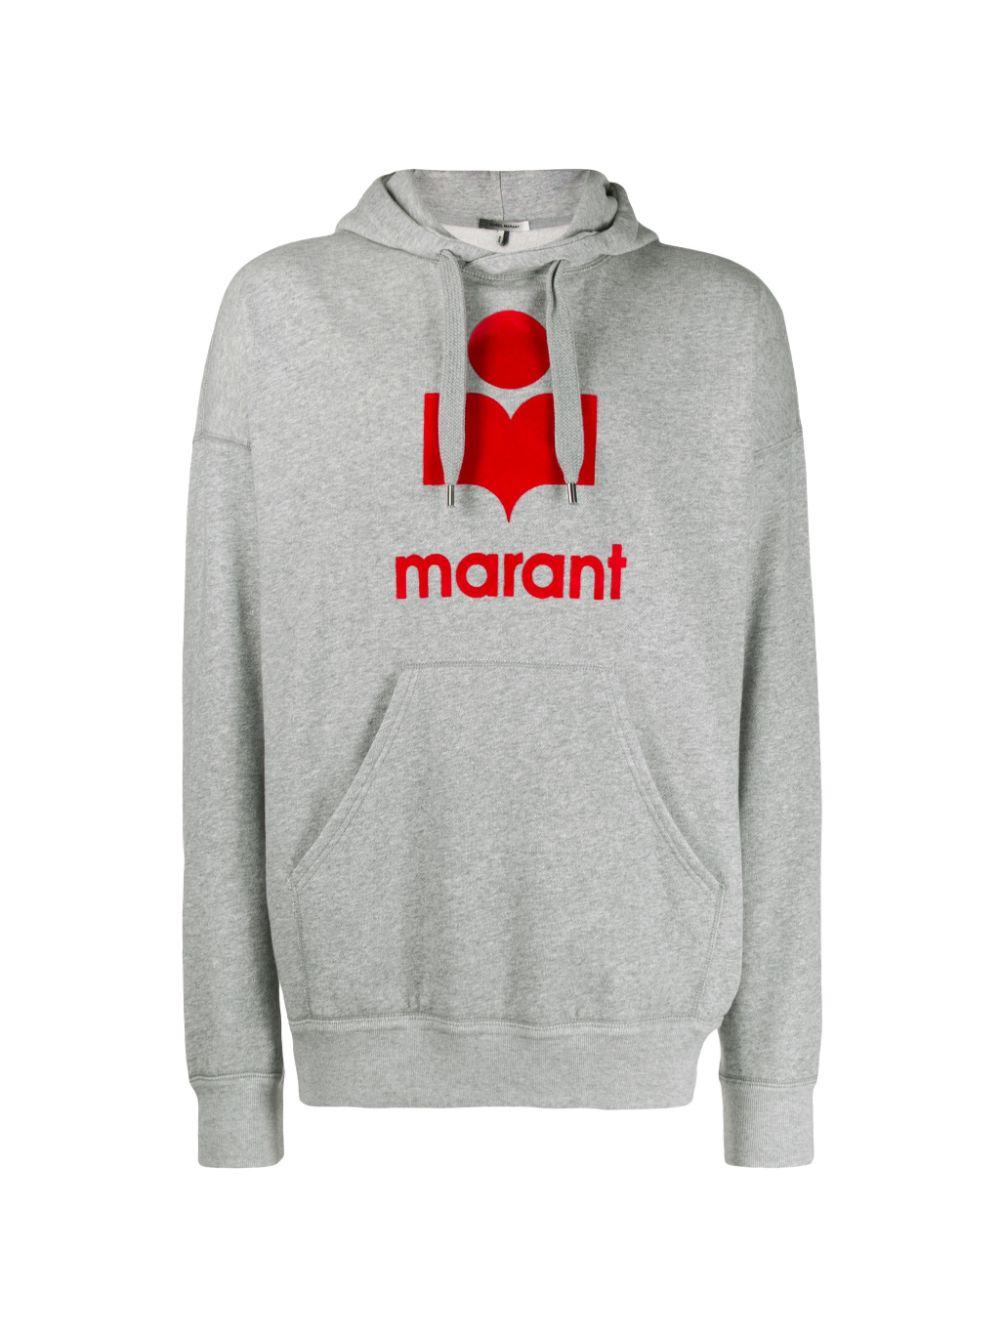 Isabel Marant Cotton Logo Print Hoodie in Grey (Gray) for Men - Lyst